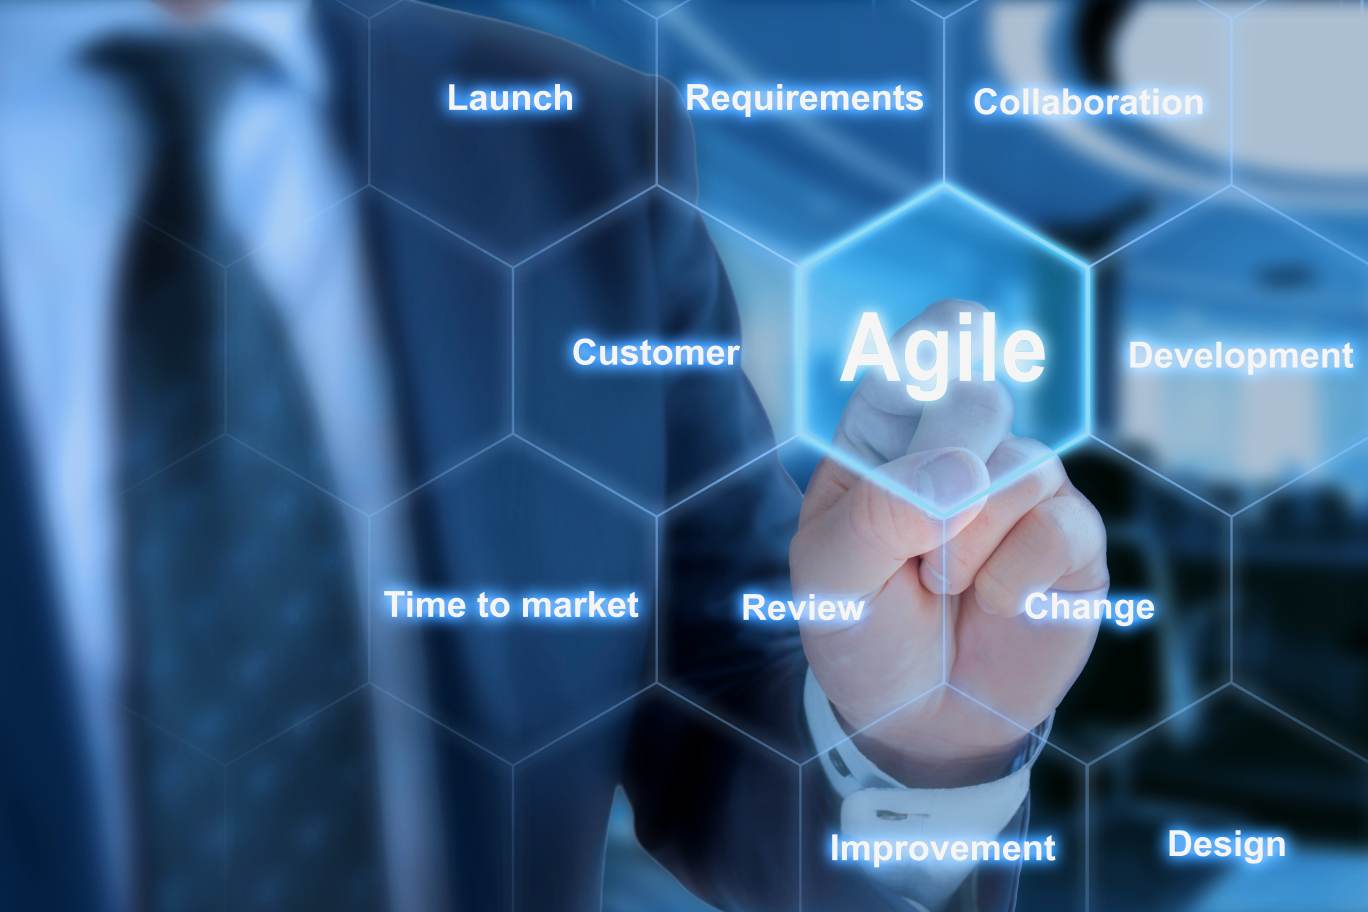 IT expert pressing a tile in an agile development keyword grid with tiles launch requirements collaboration customer agile development time to market review change improvement design